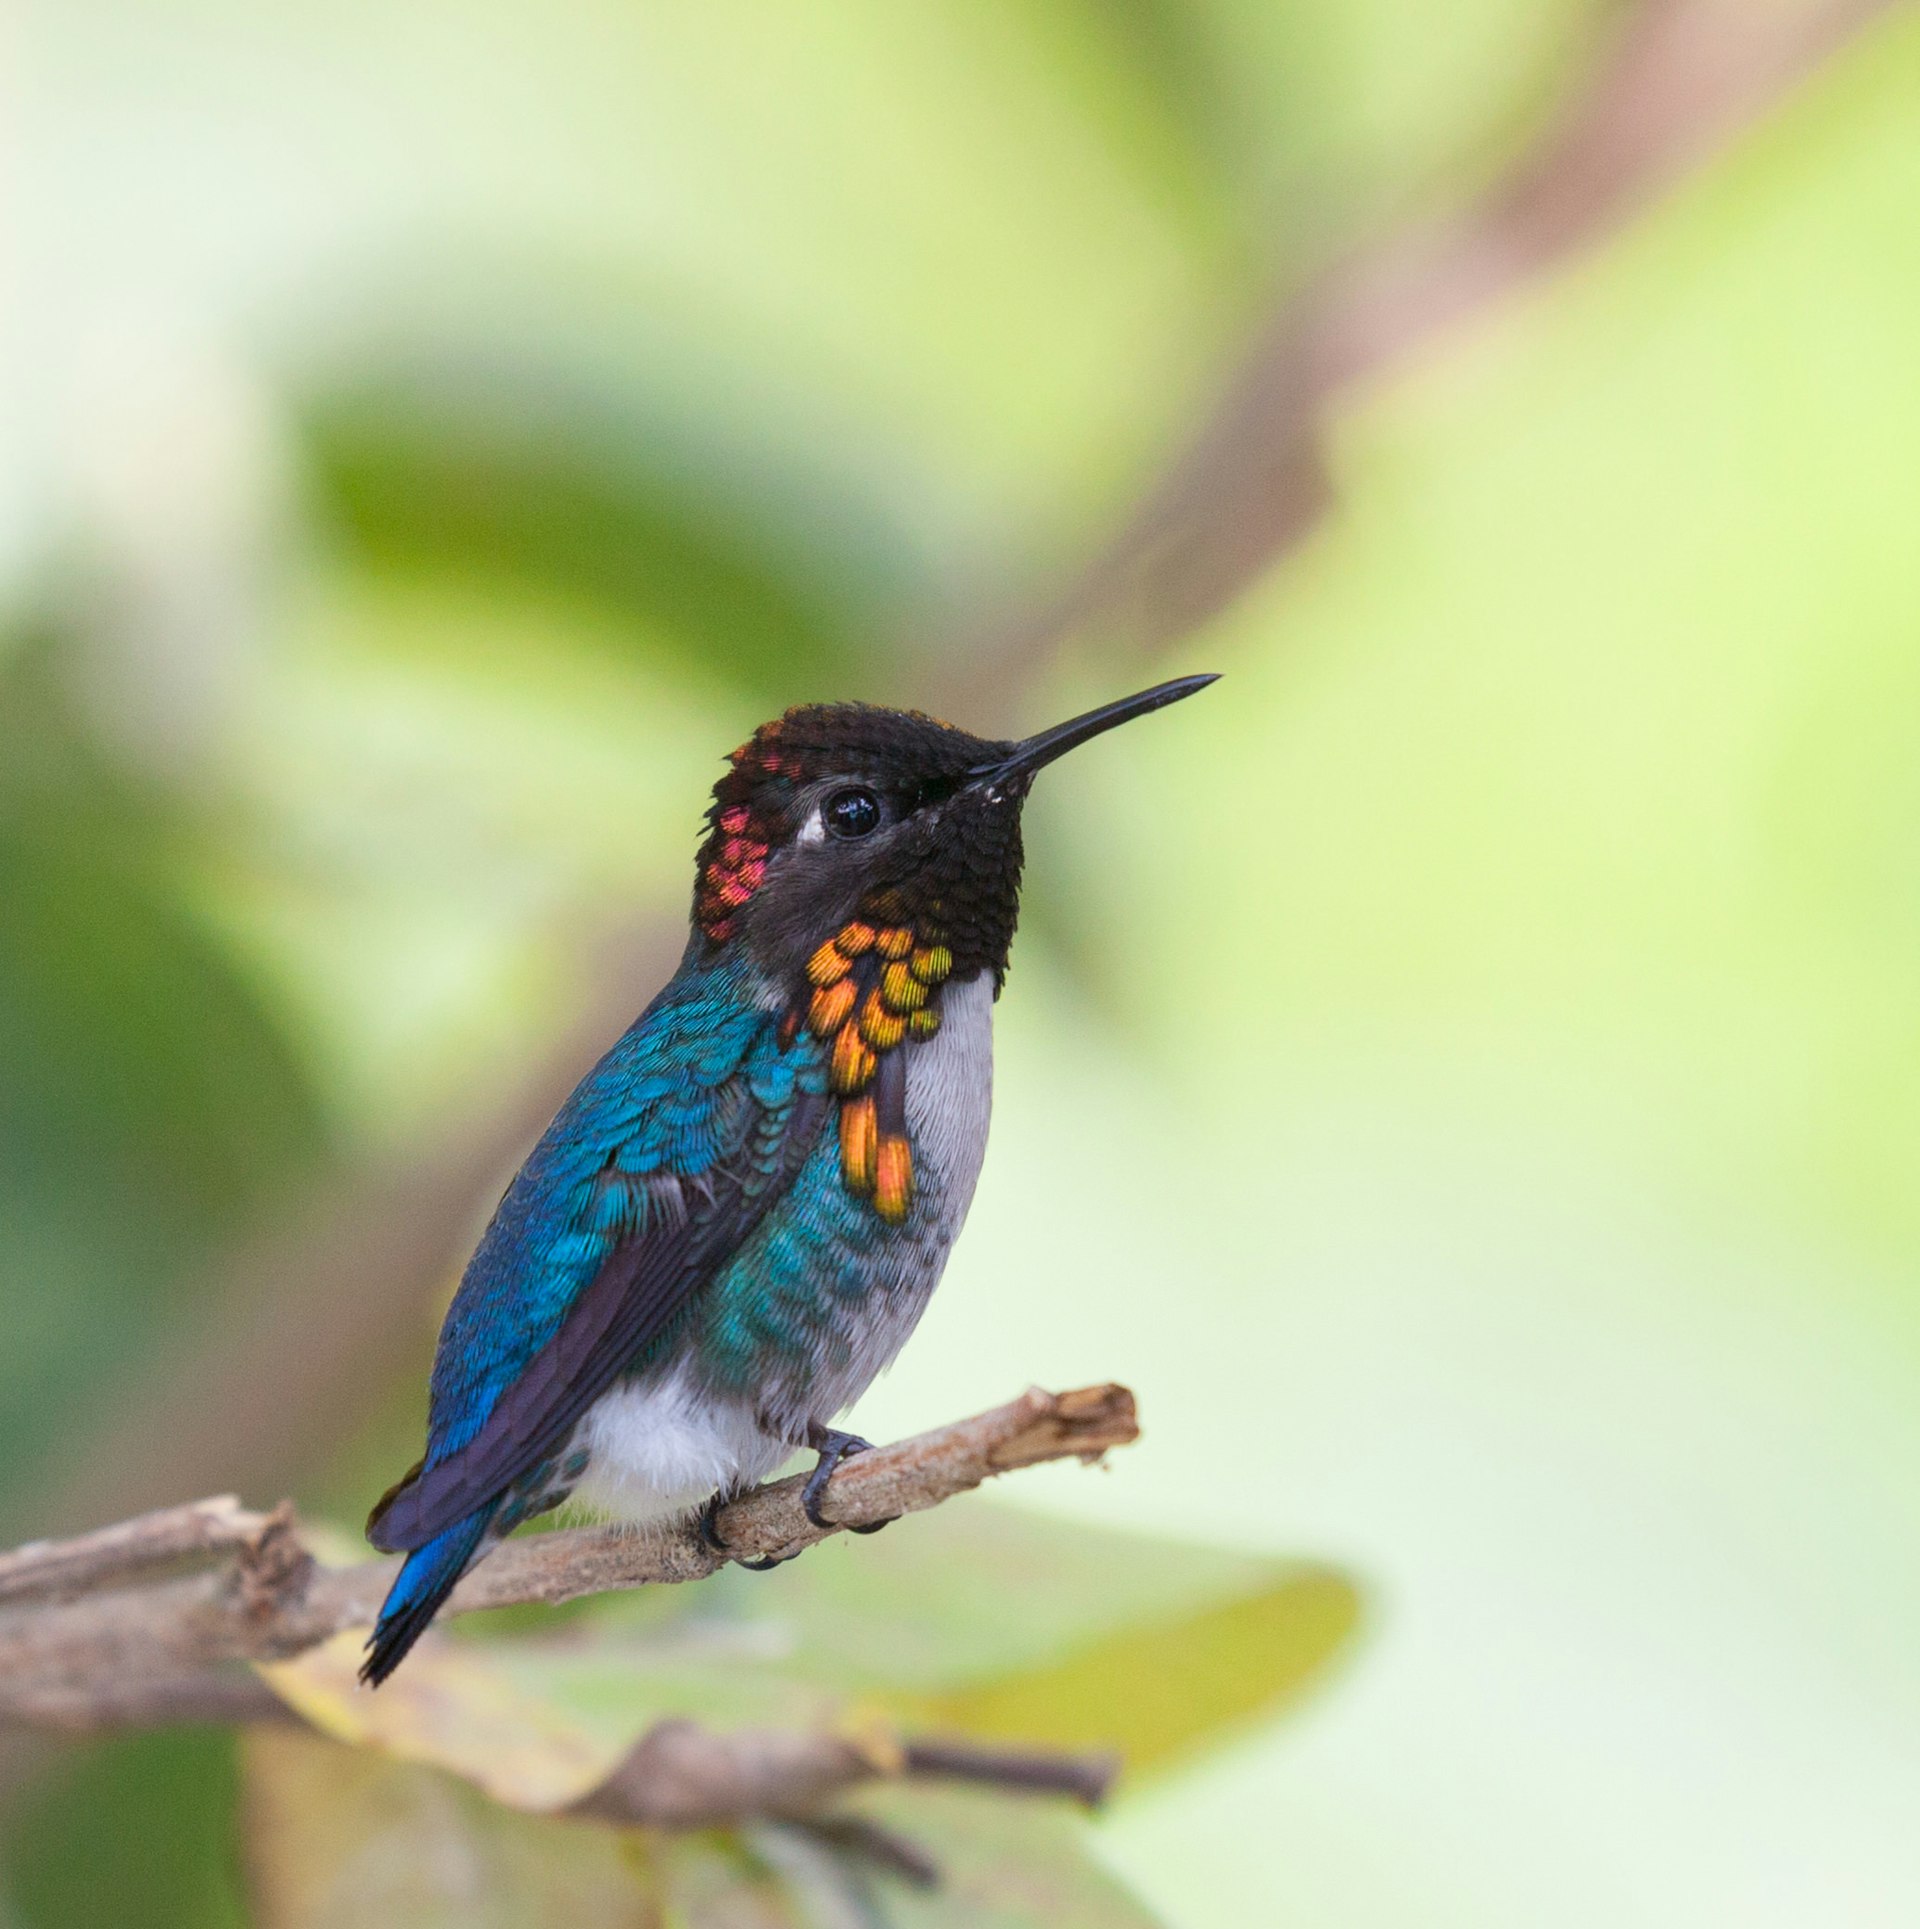 The blue, orange and red feathers and long black beak of the male bee hummingbird, pictured perched on a branch